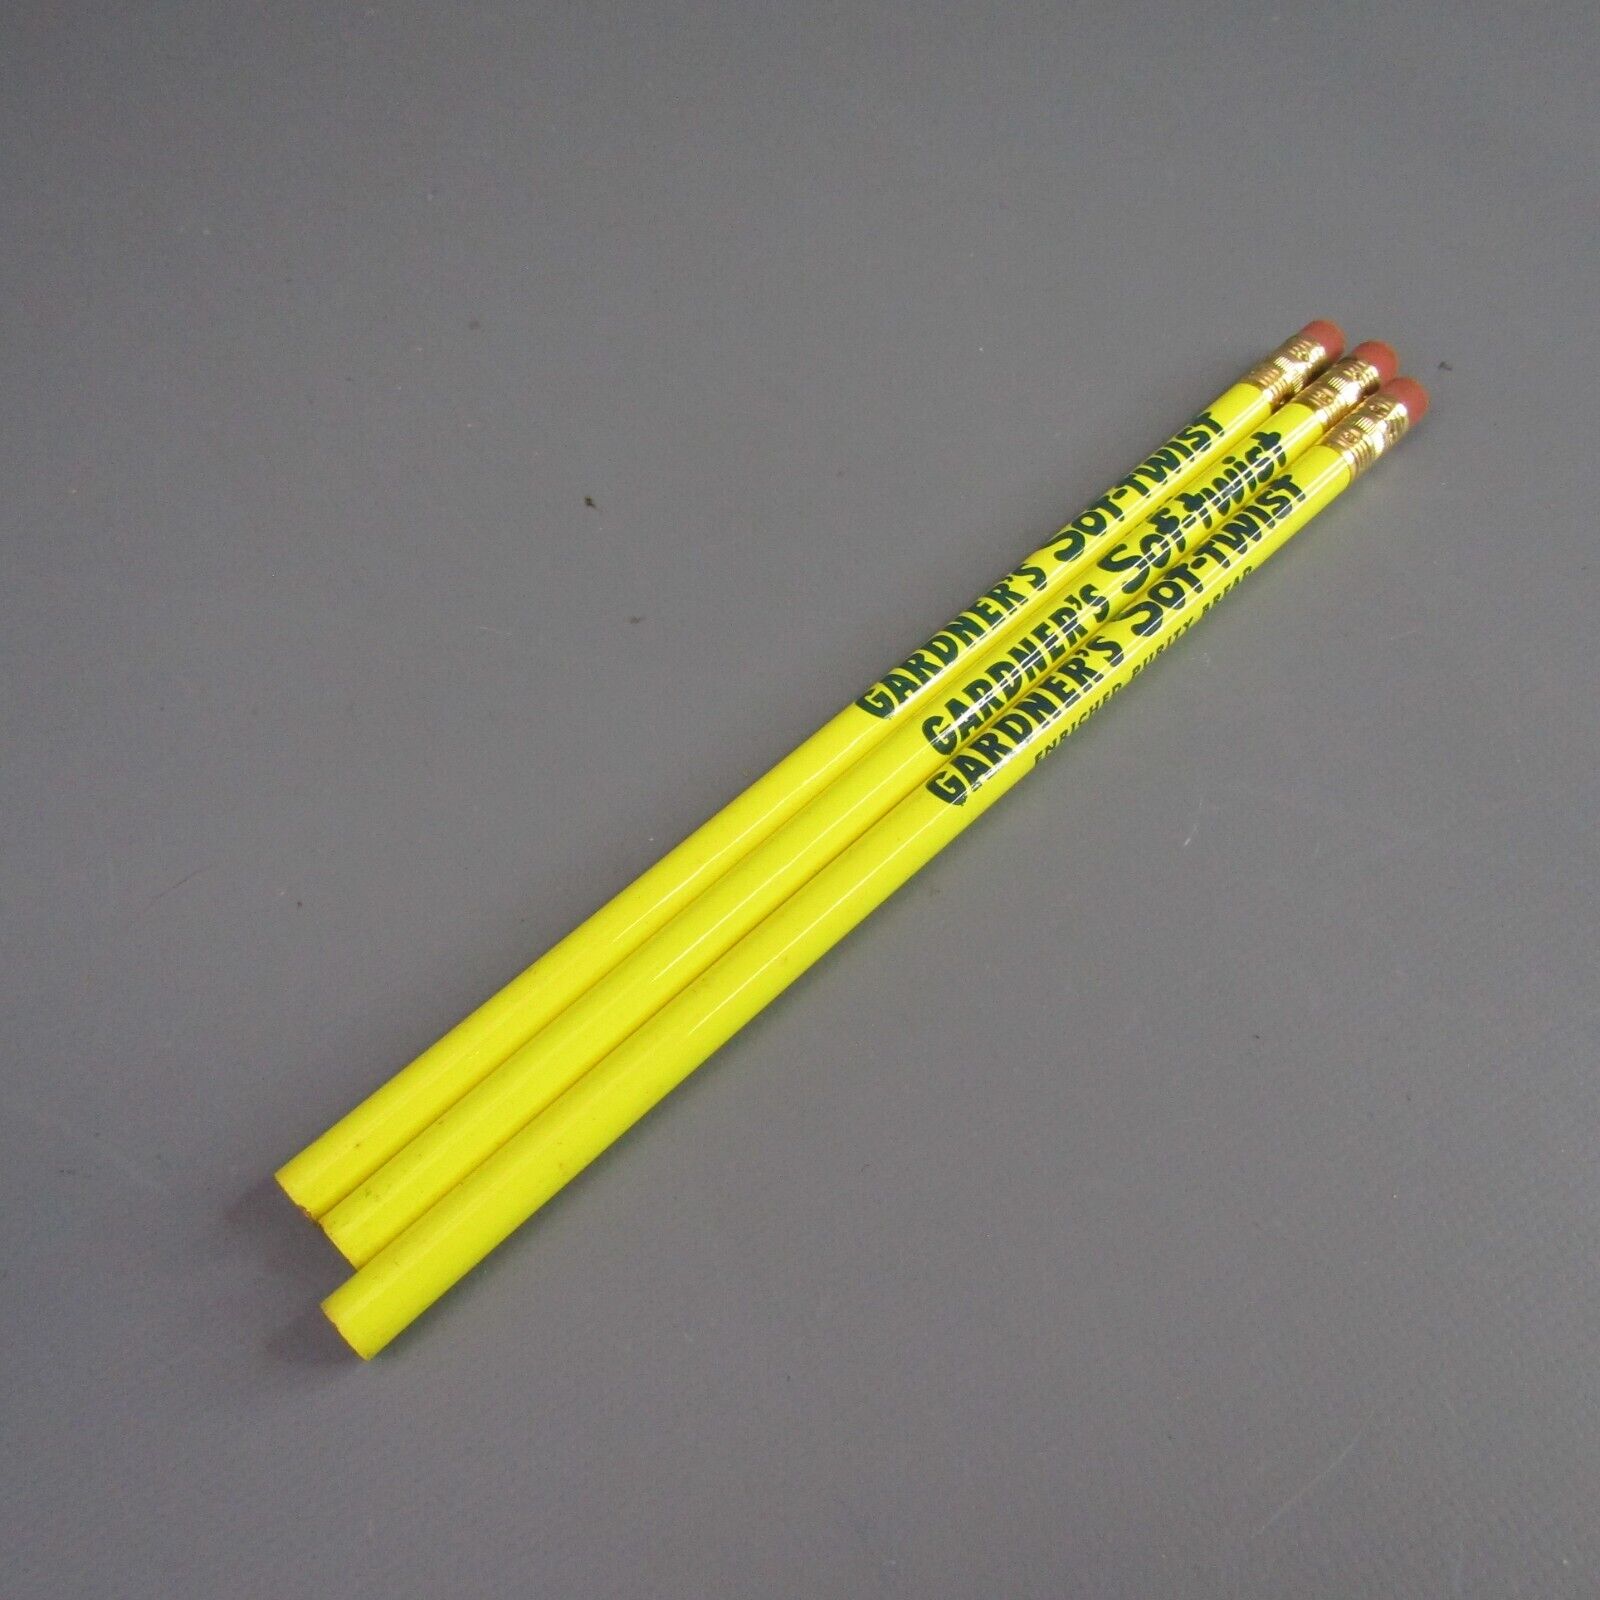 Vintage Gardner's Sof-Twist Enriched Purity Bread Pencil Lot of 3 Yellow Pencils